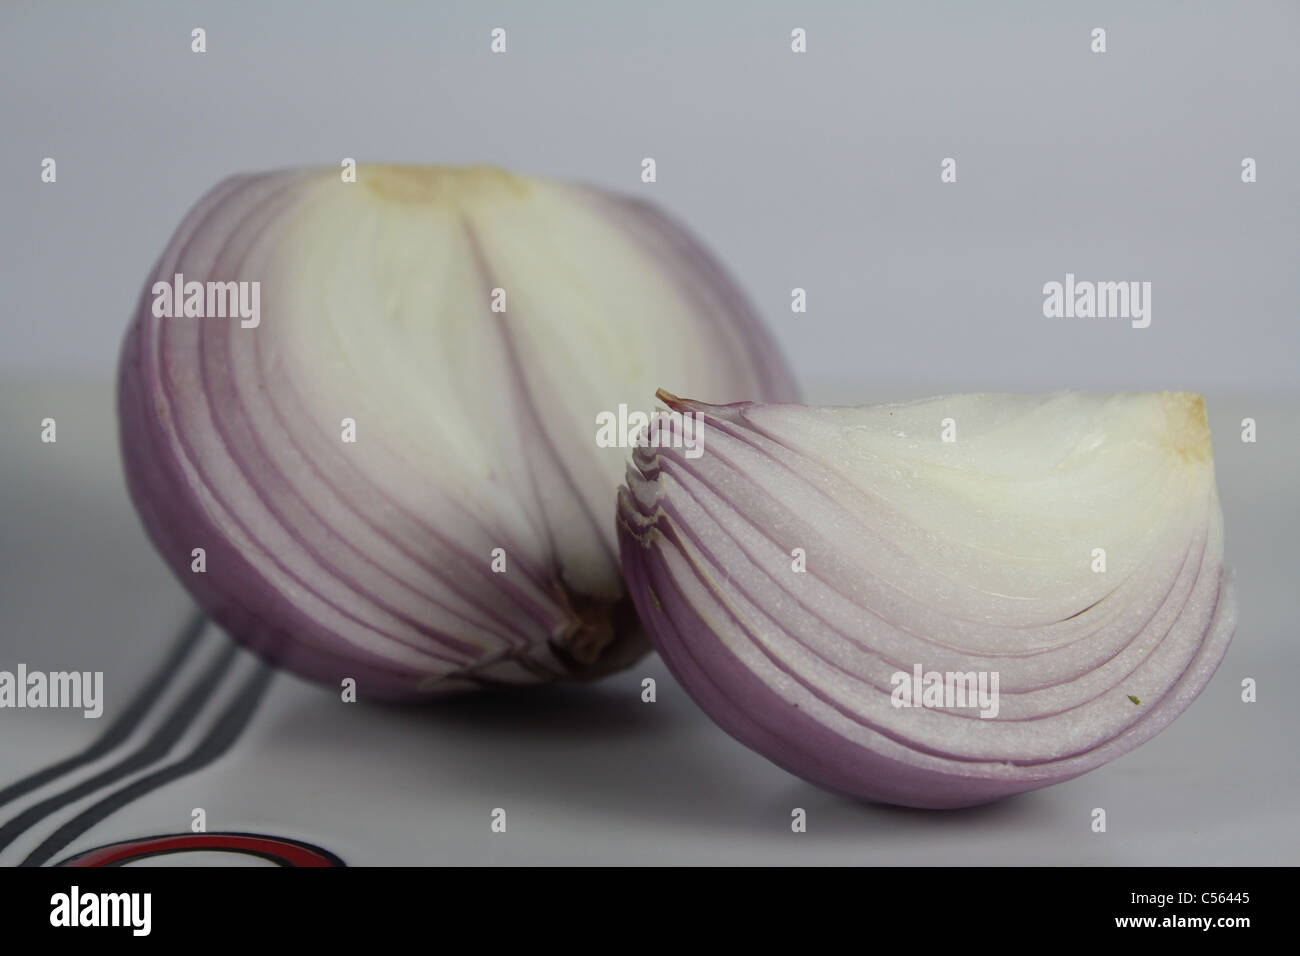 Onion slices pieces on a platter Stock Photo